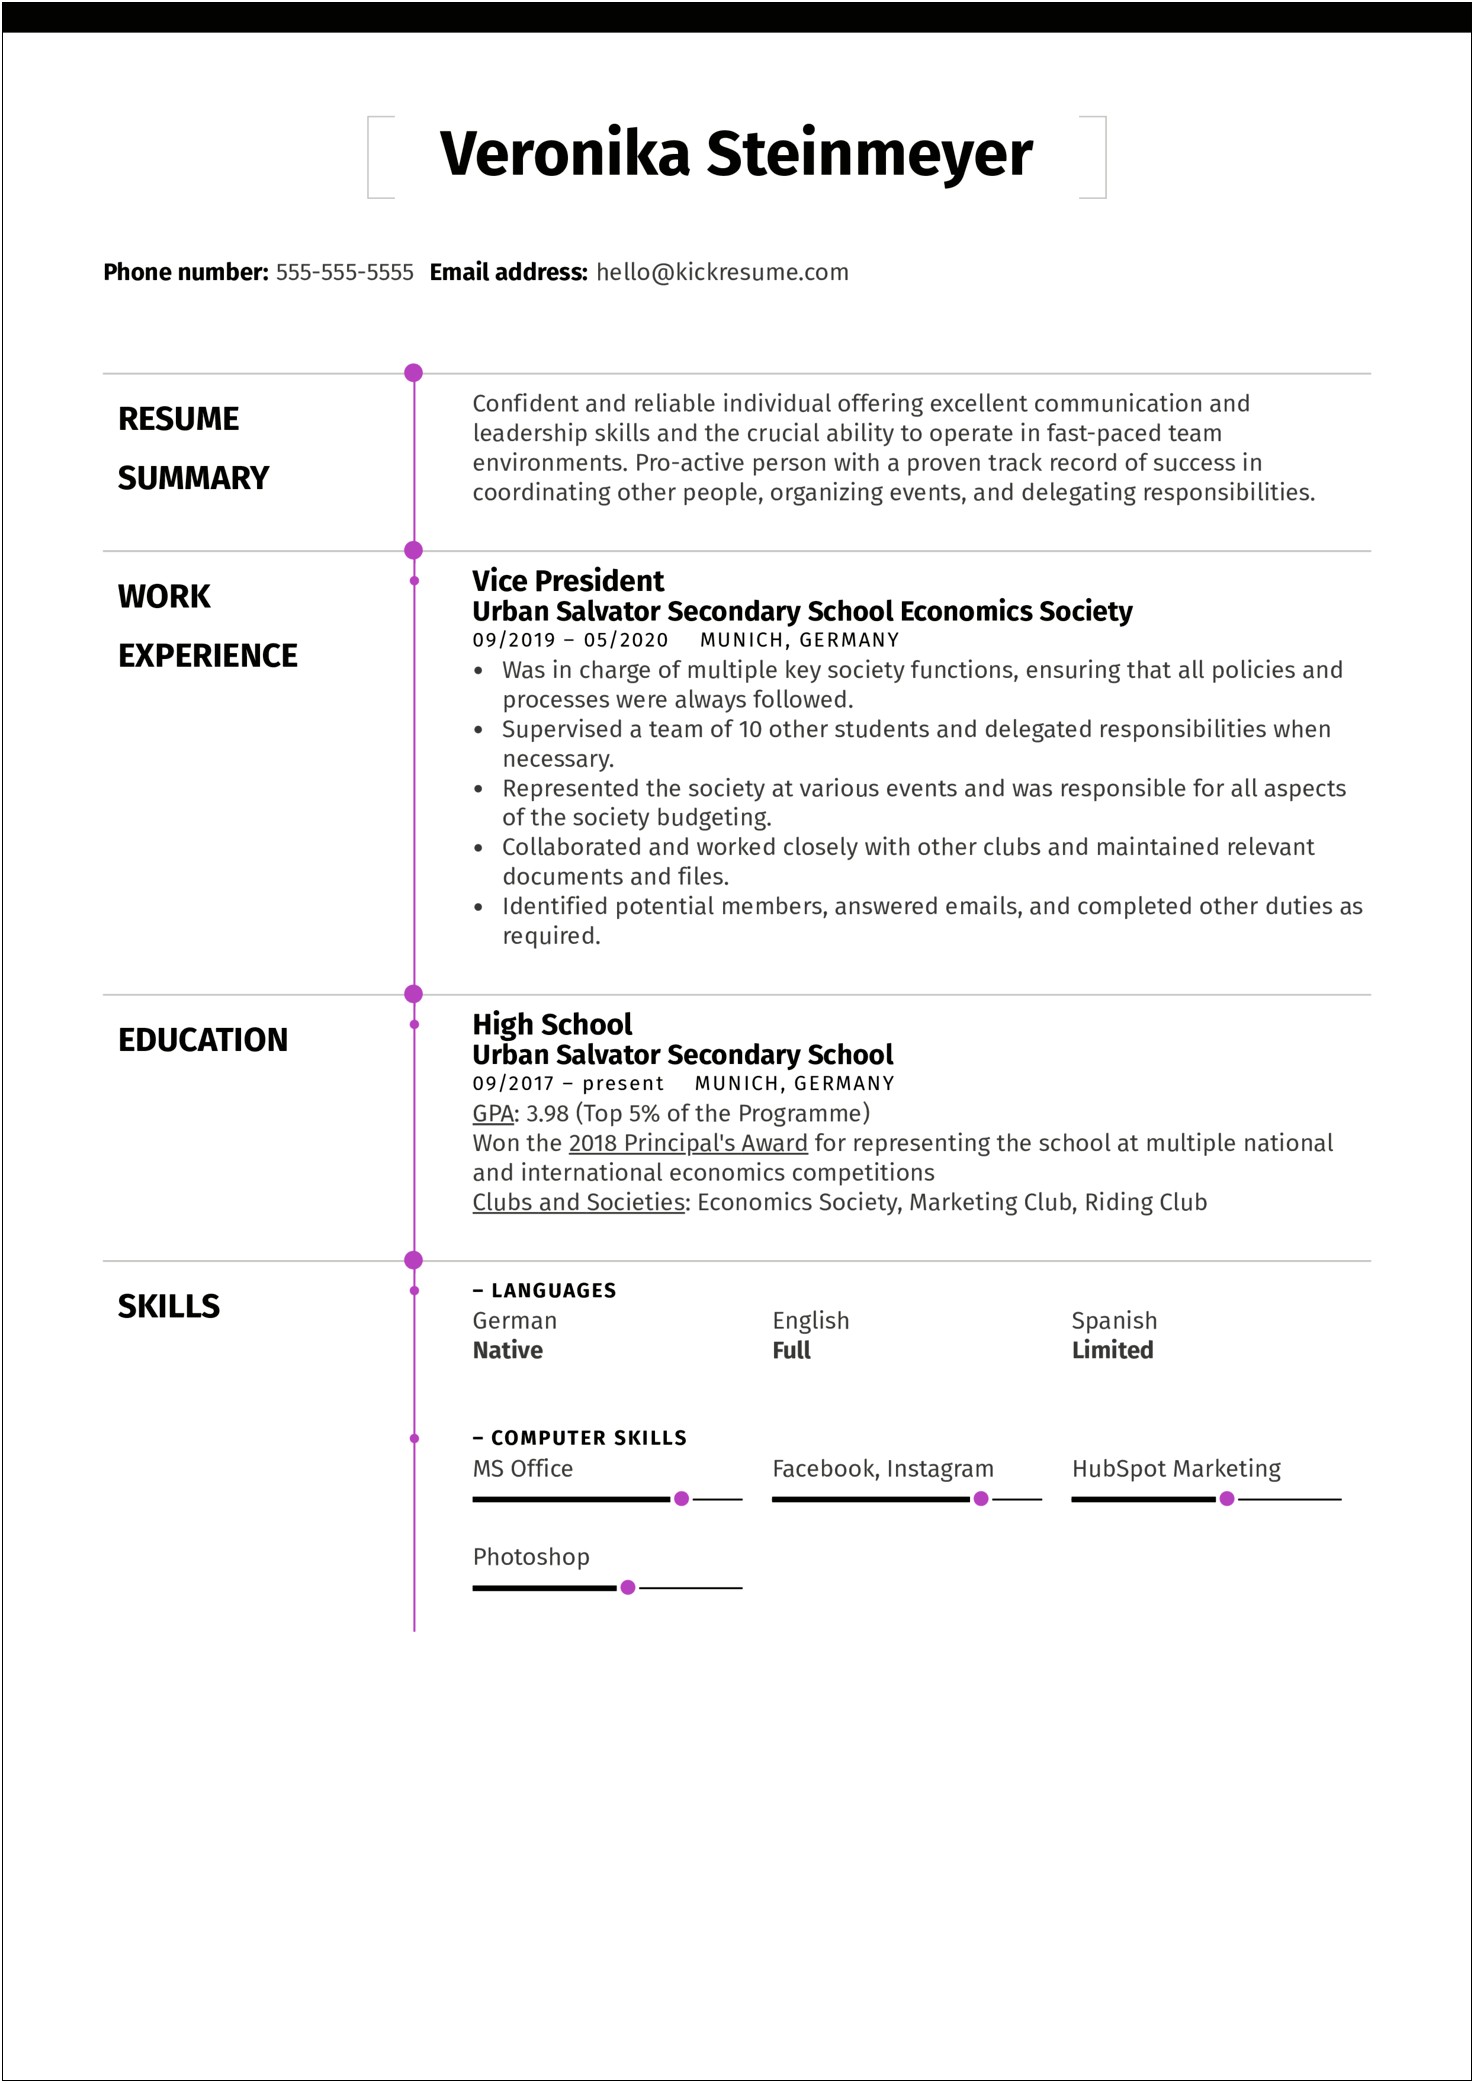 Resume Skills And Expertise For High School Students